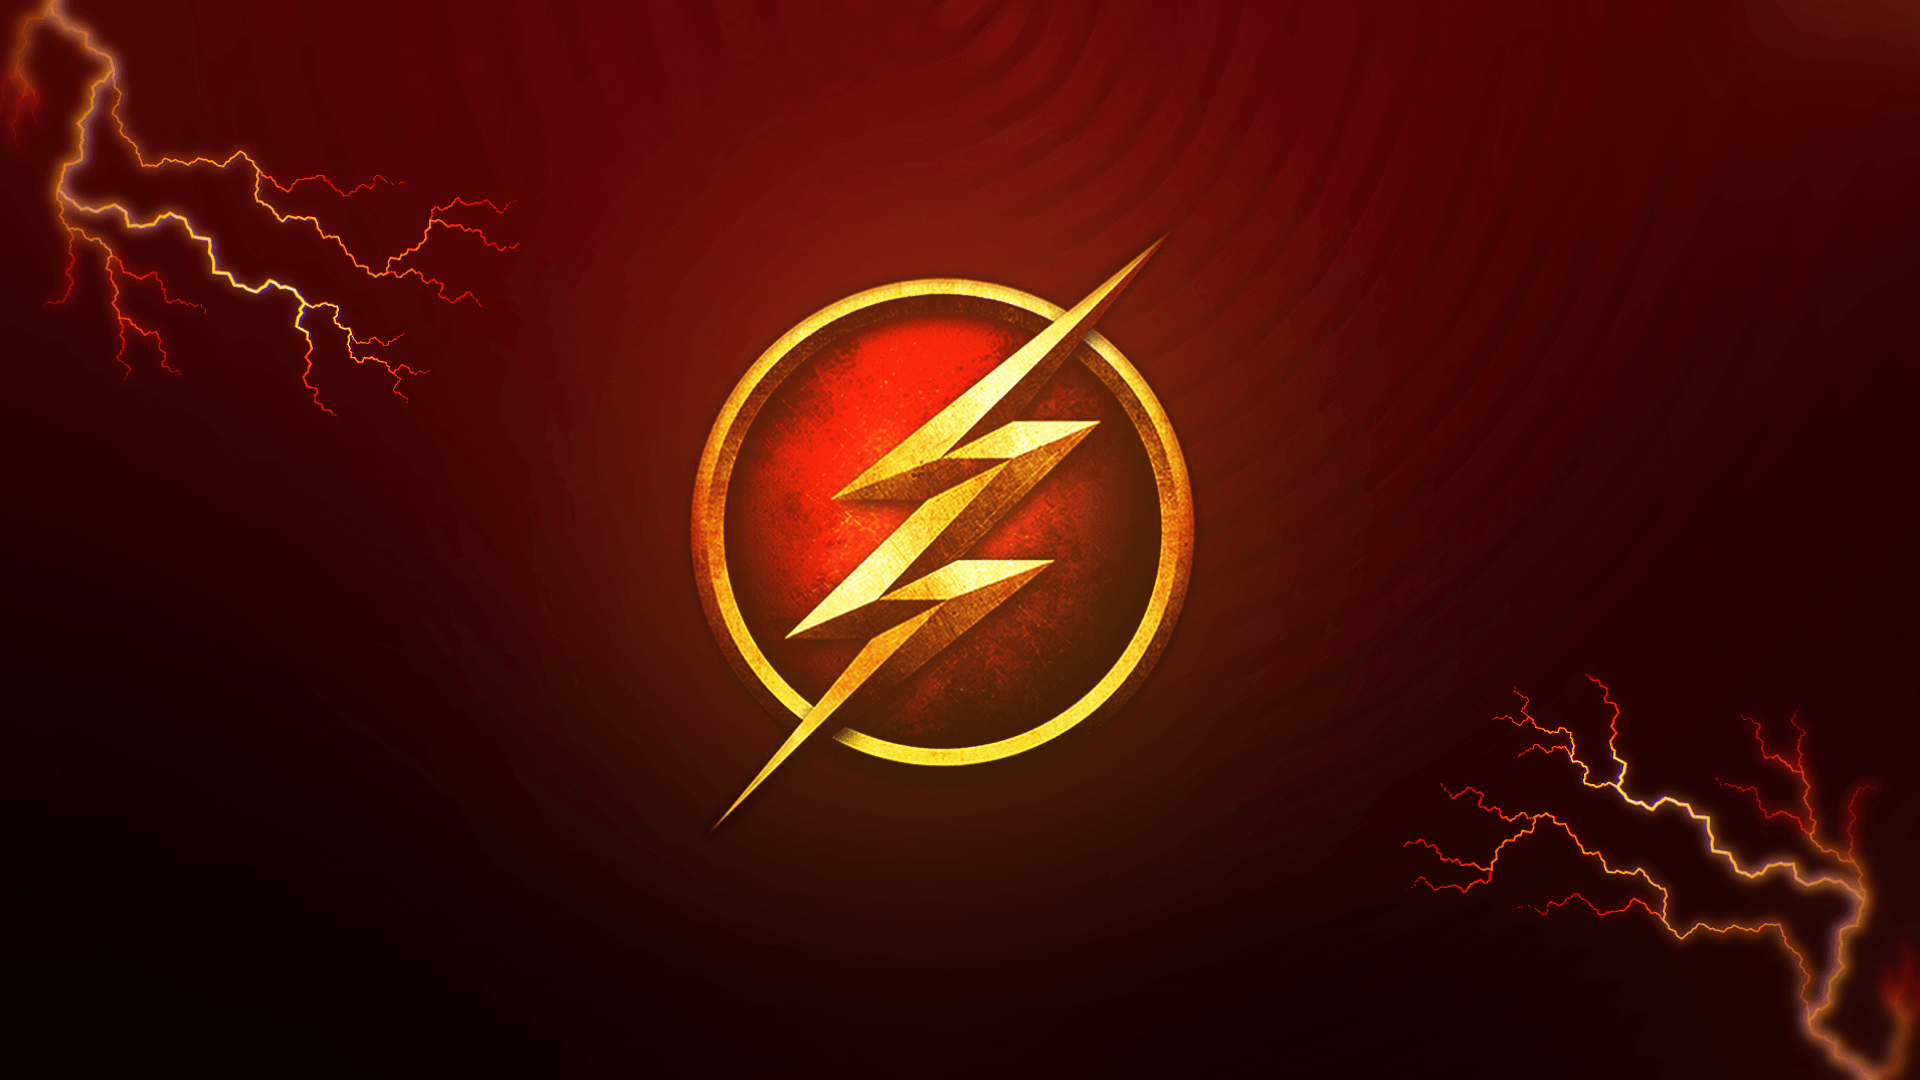 The Flash Wallpapers - Top Free The Flash Backgrounds 